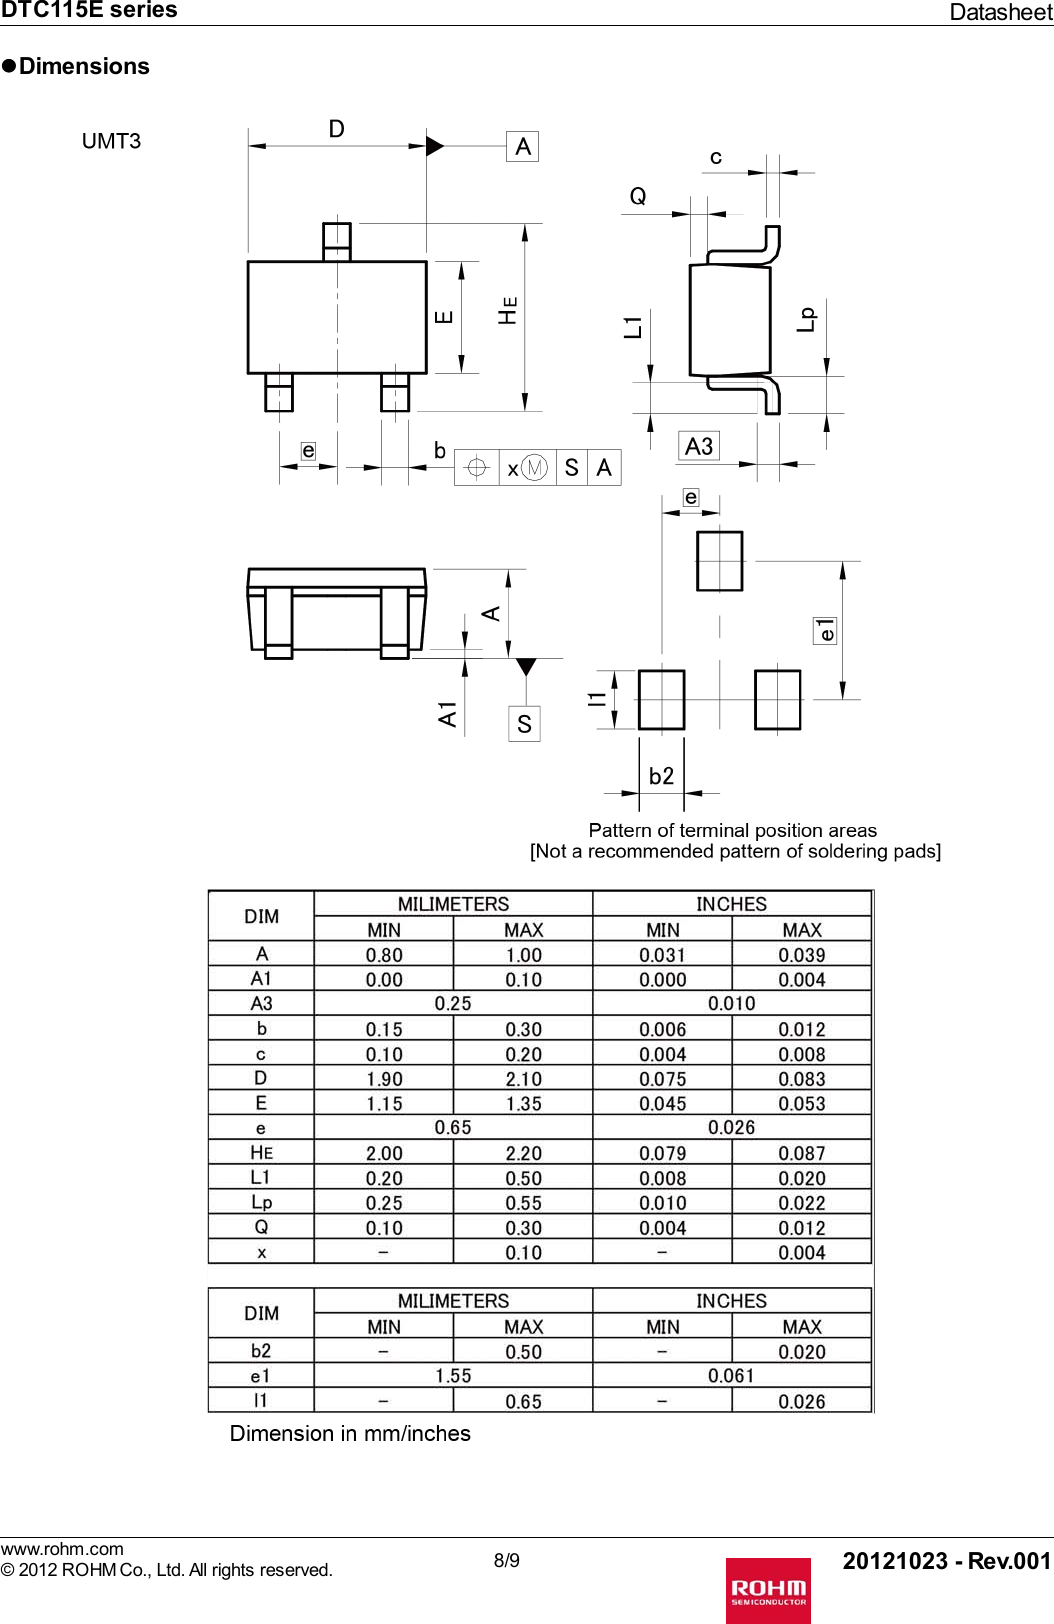 Page 8 of 11 - DTC115E Series - Datasheet. Www.s-manuals.com. Rohm